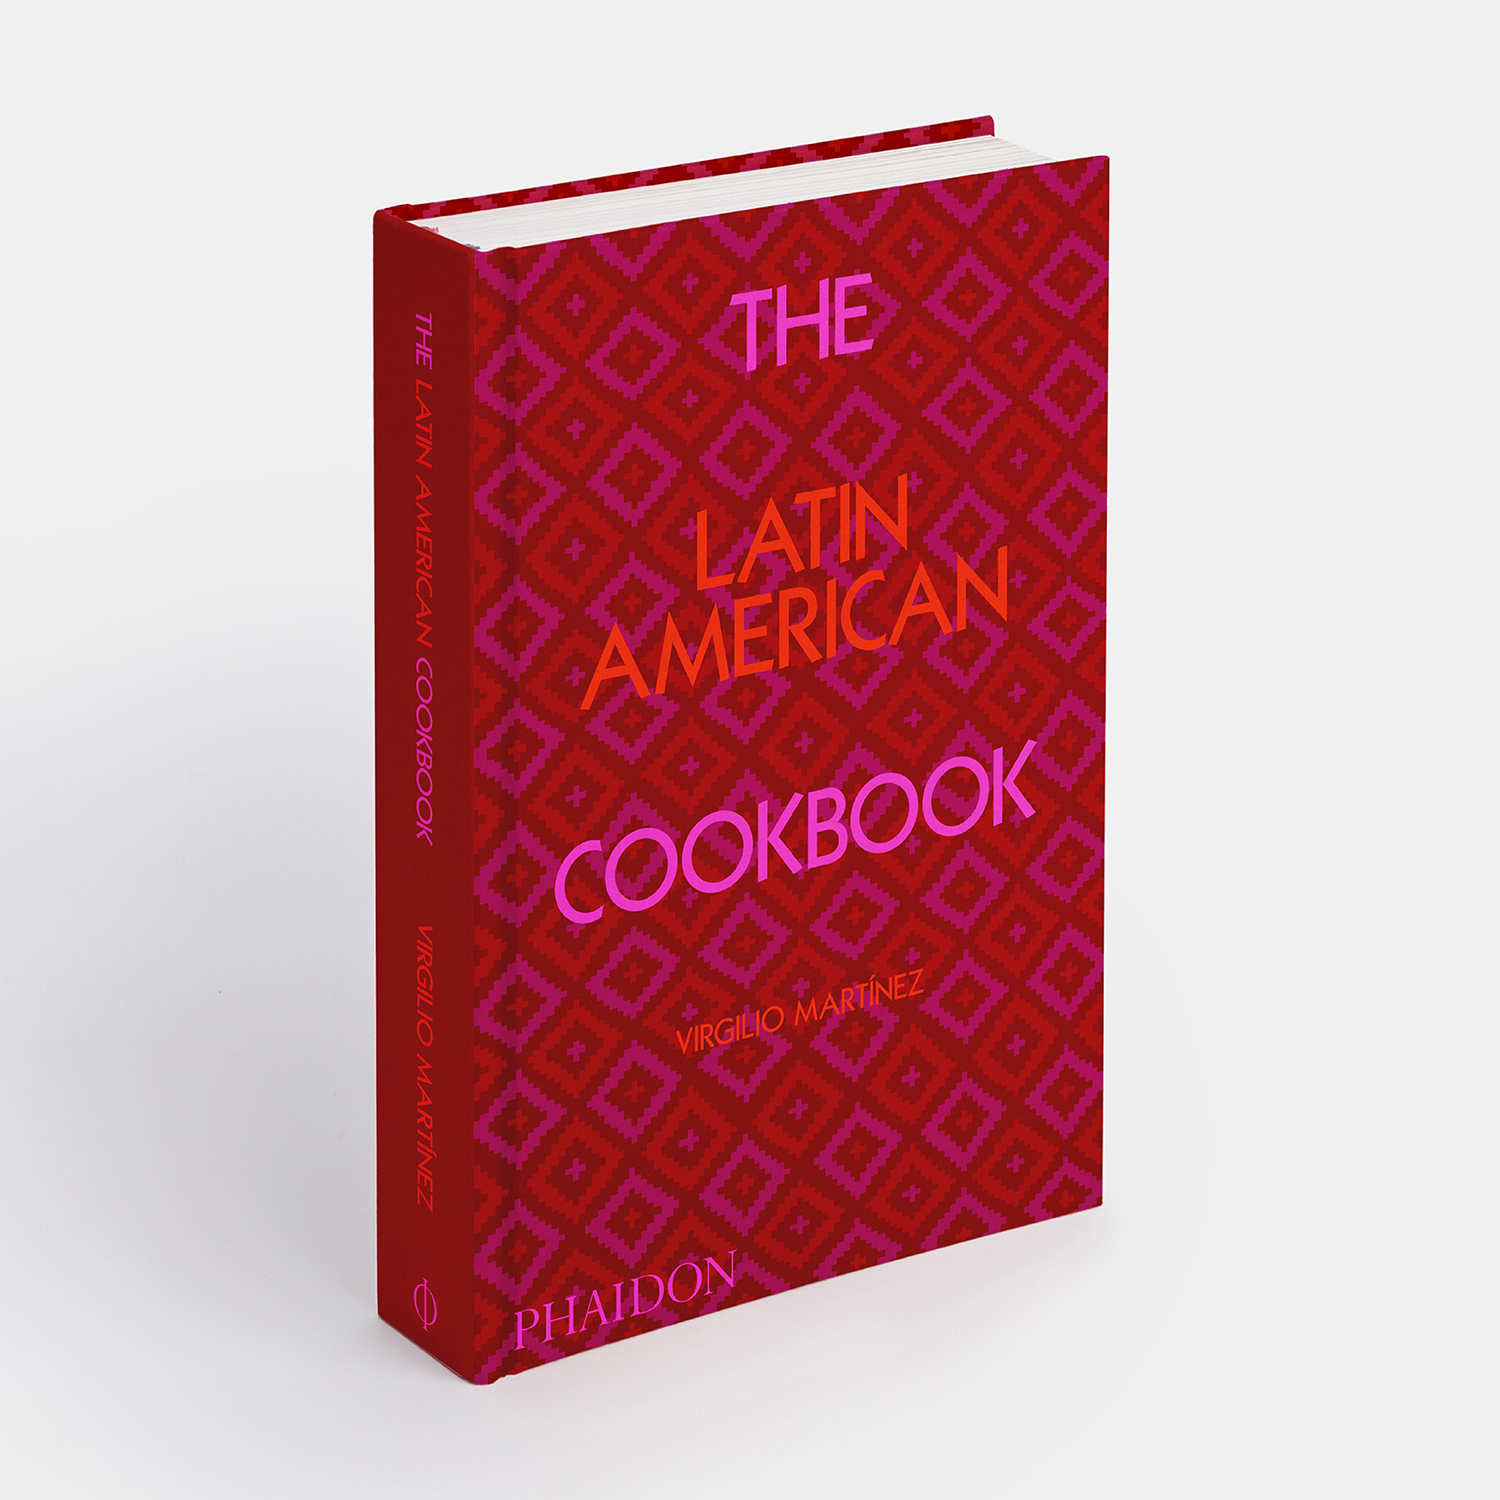 All you need to know about The Latin American Cookbook